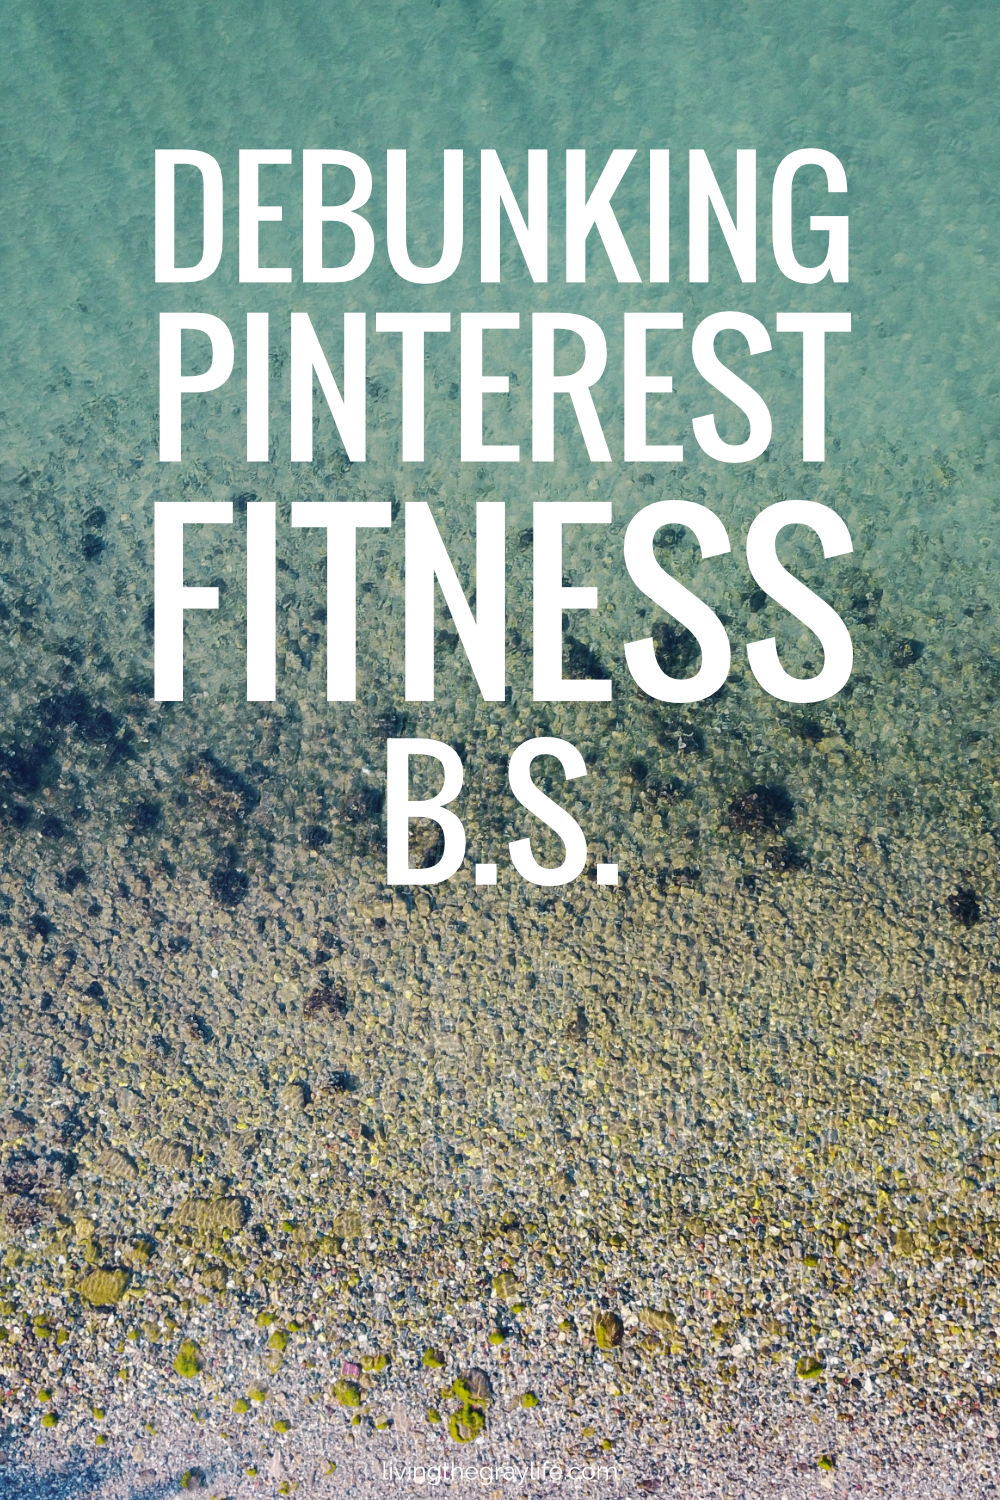 Ever come across Pinterest fitness articles and don't know how to separate fact from fiction? Look no further! 